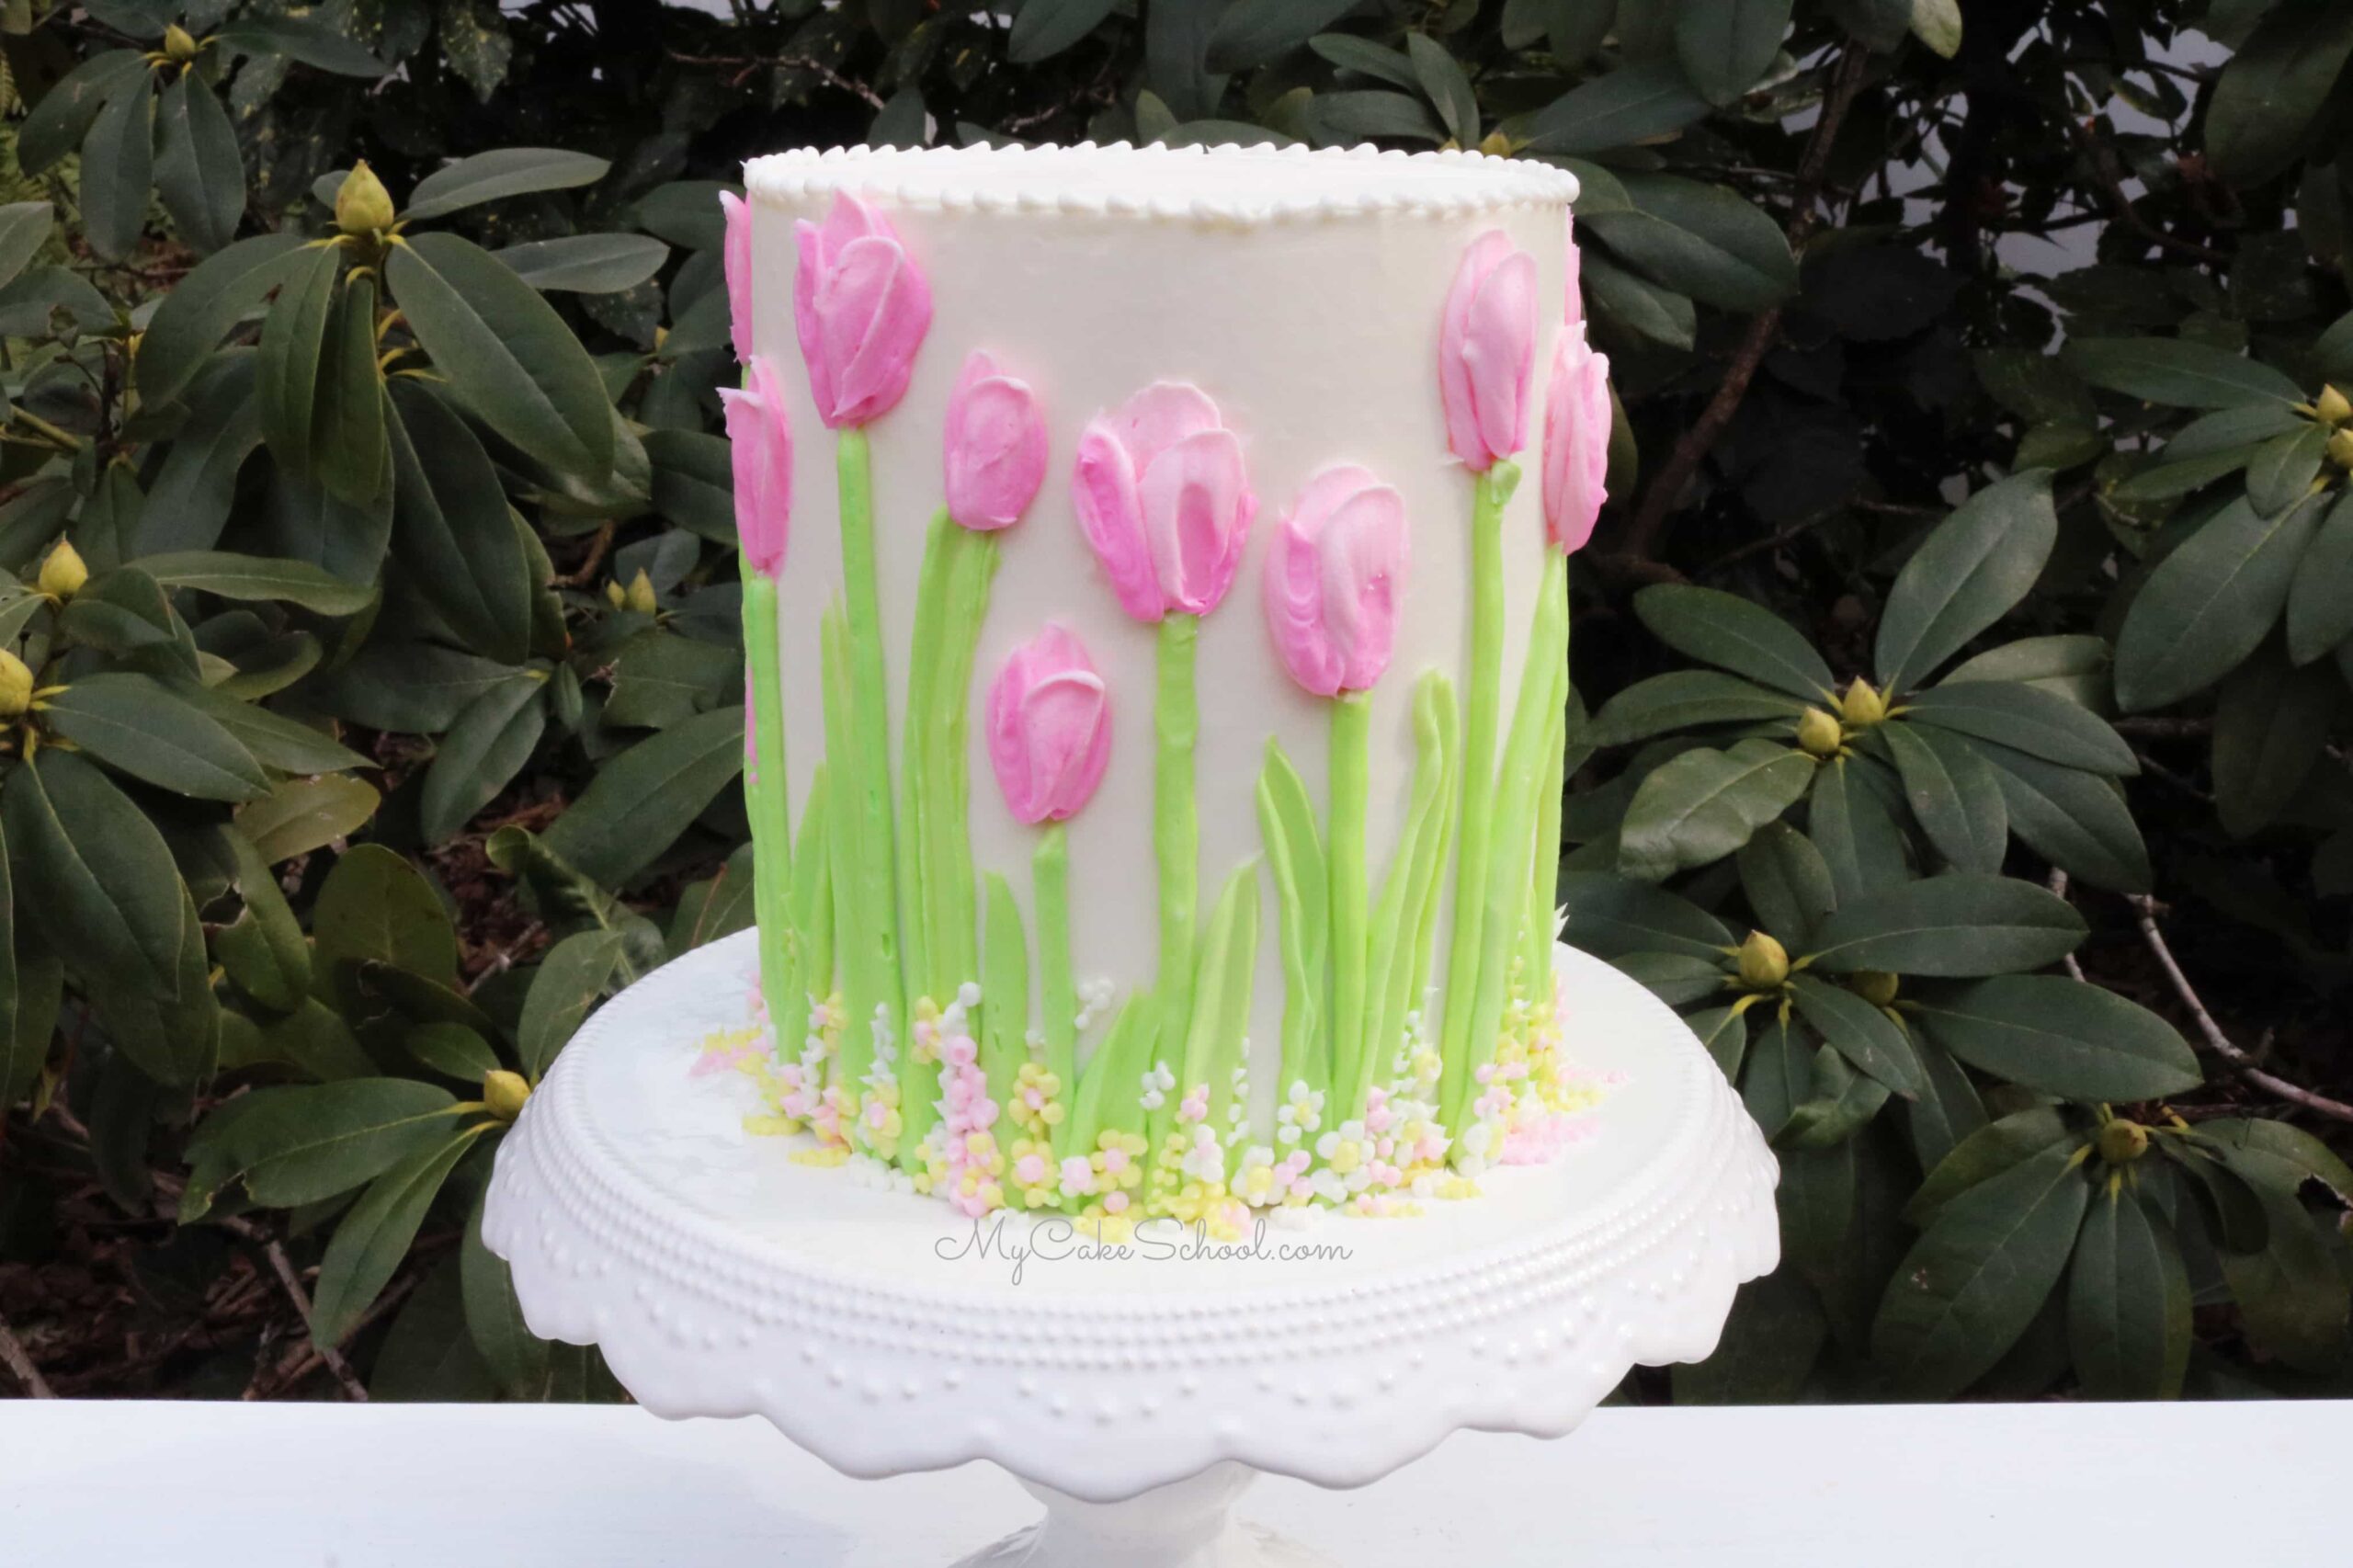 My Cake School. 1 scaled Top 10 Best Online Cake Decorating Classes - 5